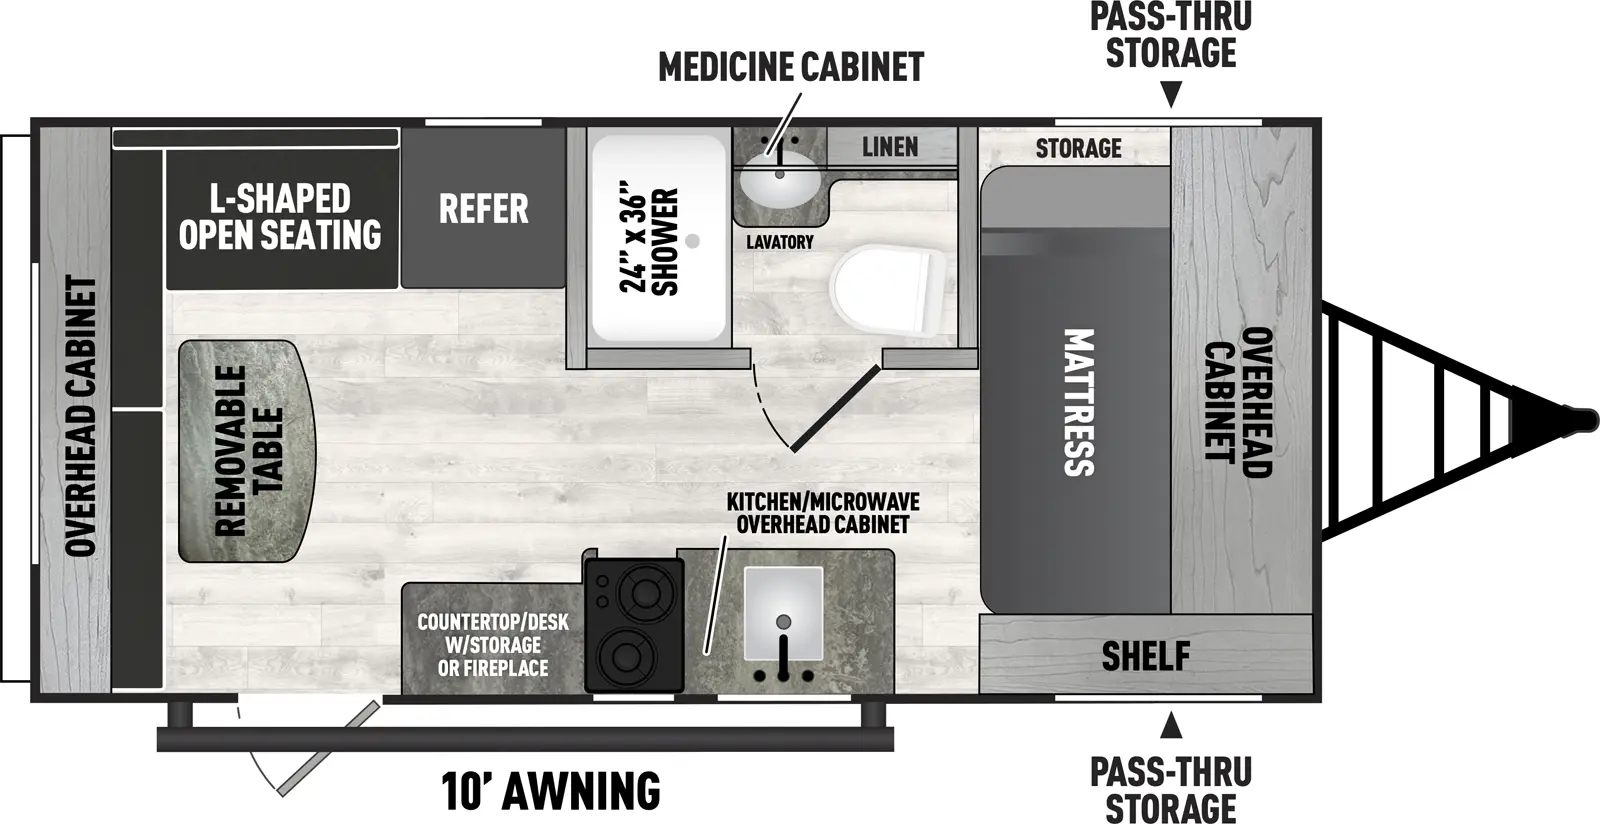 The 18RL has zero slideouts and one entry. Exterior features front pass-through storage, and 10 foot awning. Interior layout front to back: side-facing mattress with overhead cabinet, off-door side storage, and door side shelf; off-door side full bathroom with linen closet and medicine cabinet; door side kitchen counter with sink and cooktop, microwave and overhead cabinet, countertop/desk with storage or fireplace, and entry; off-door side refrigerator, and l-shaped open seating that wraps to the rear with a removable table and overhead cabinet.